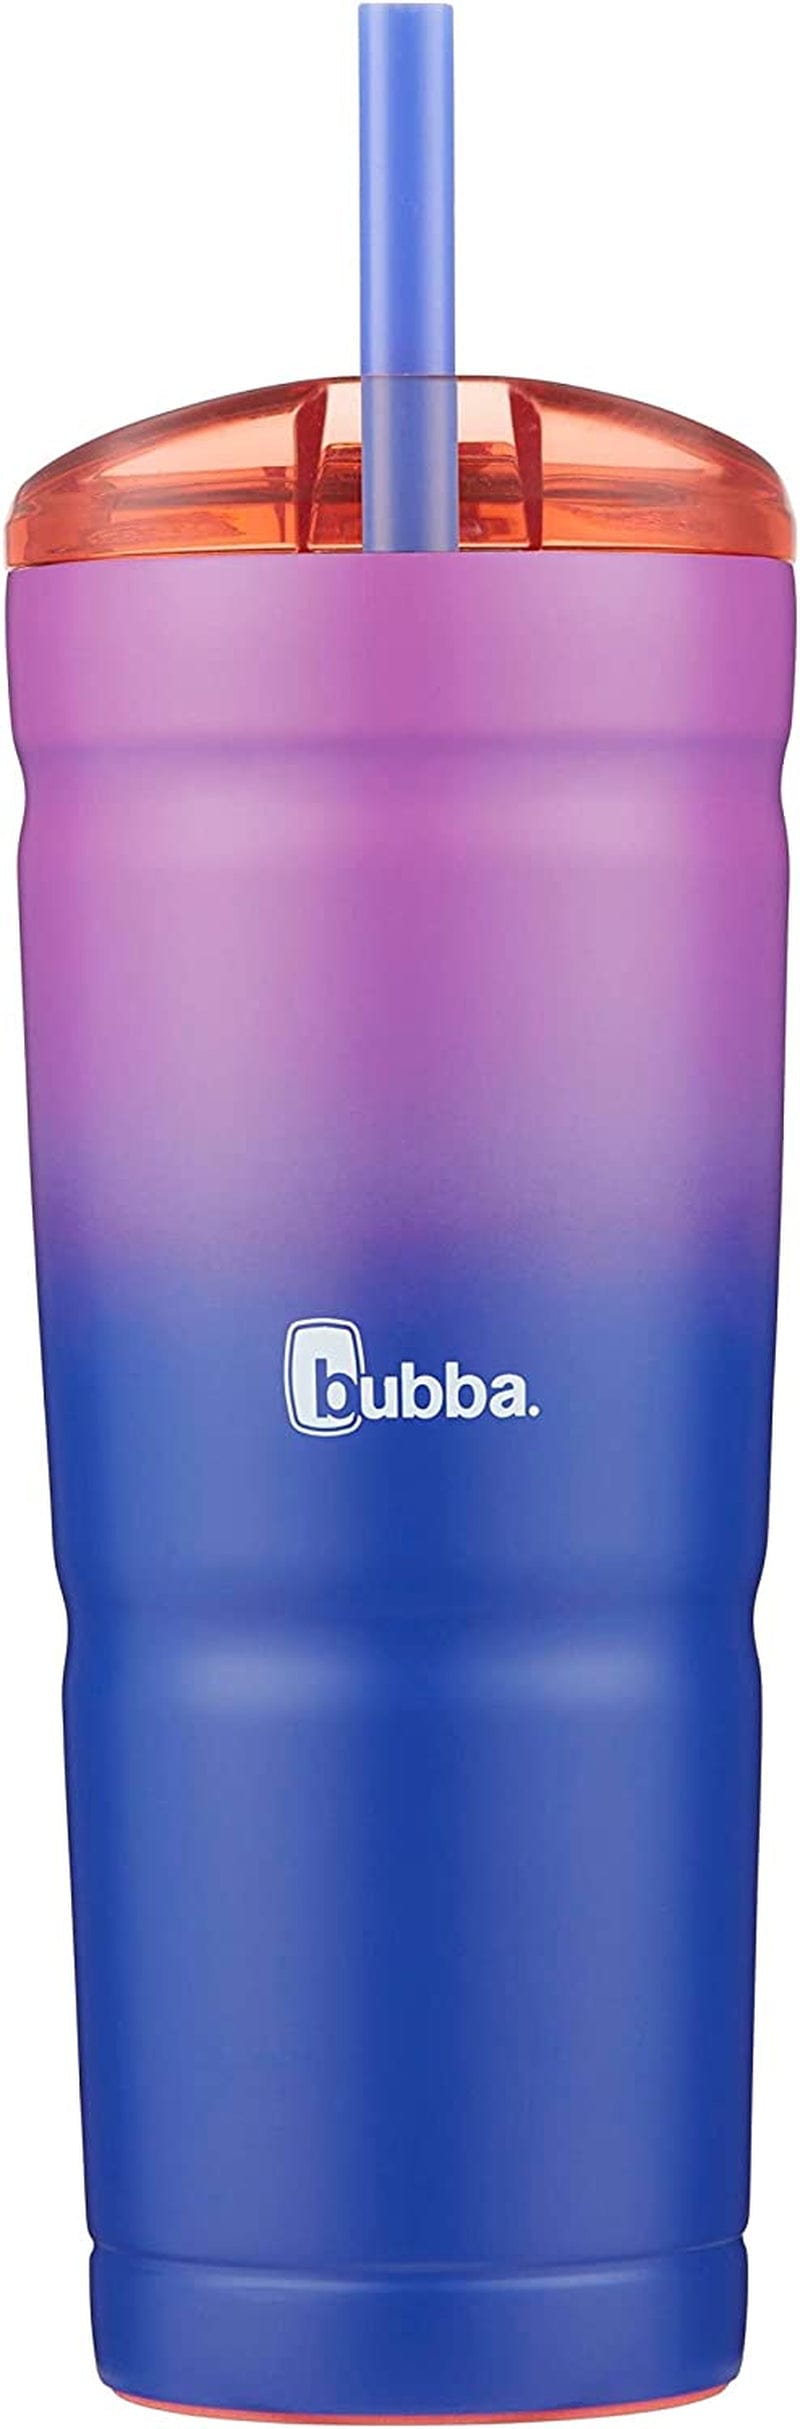 Bubba Straw Envy Vacuum-Insulated Stainless Steel Tumbler, 24 Oz., Island Teal Lid